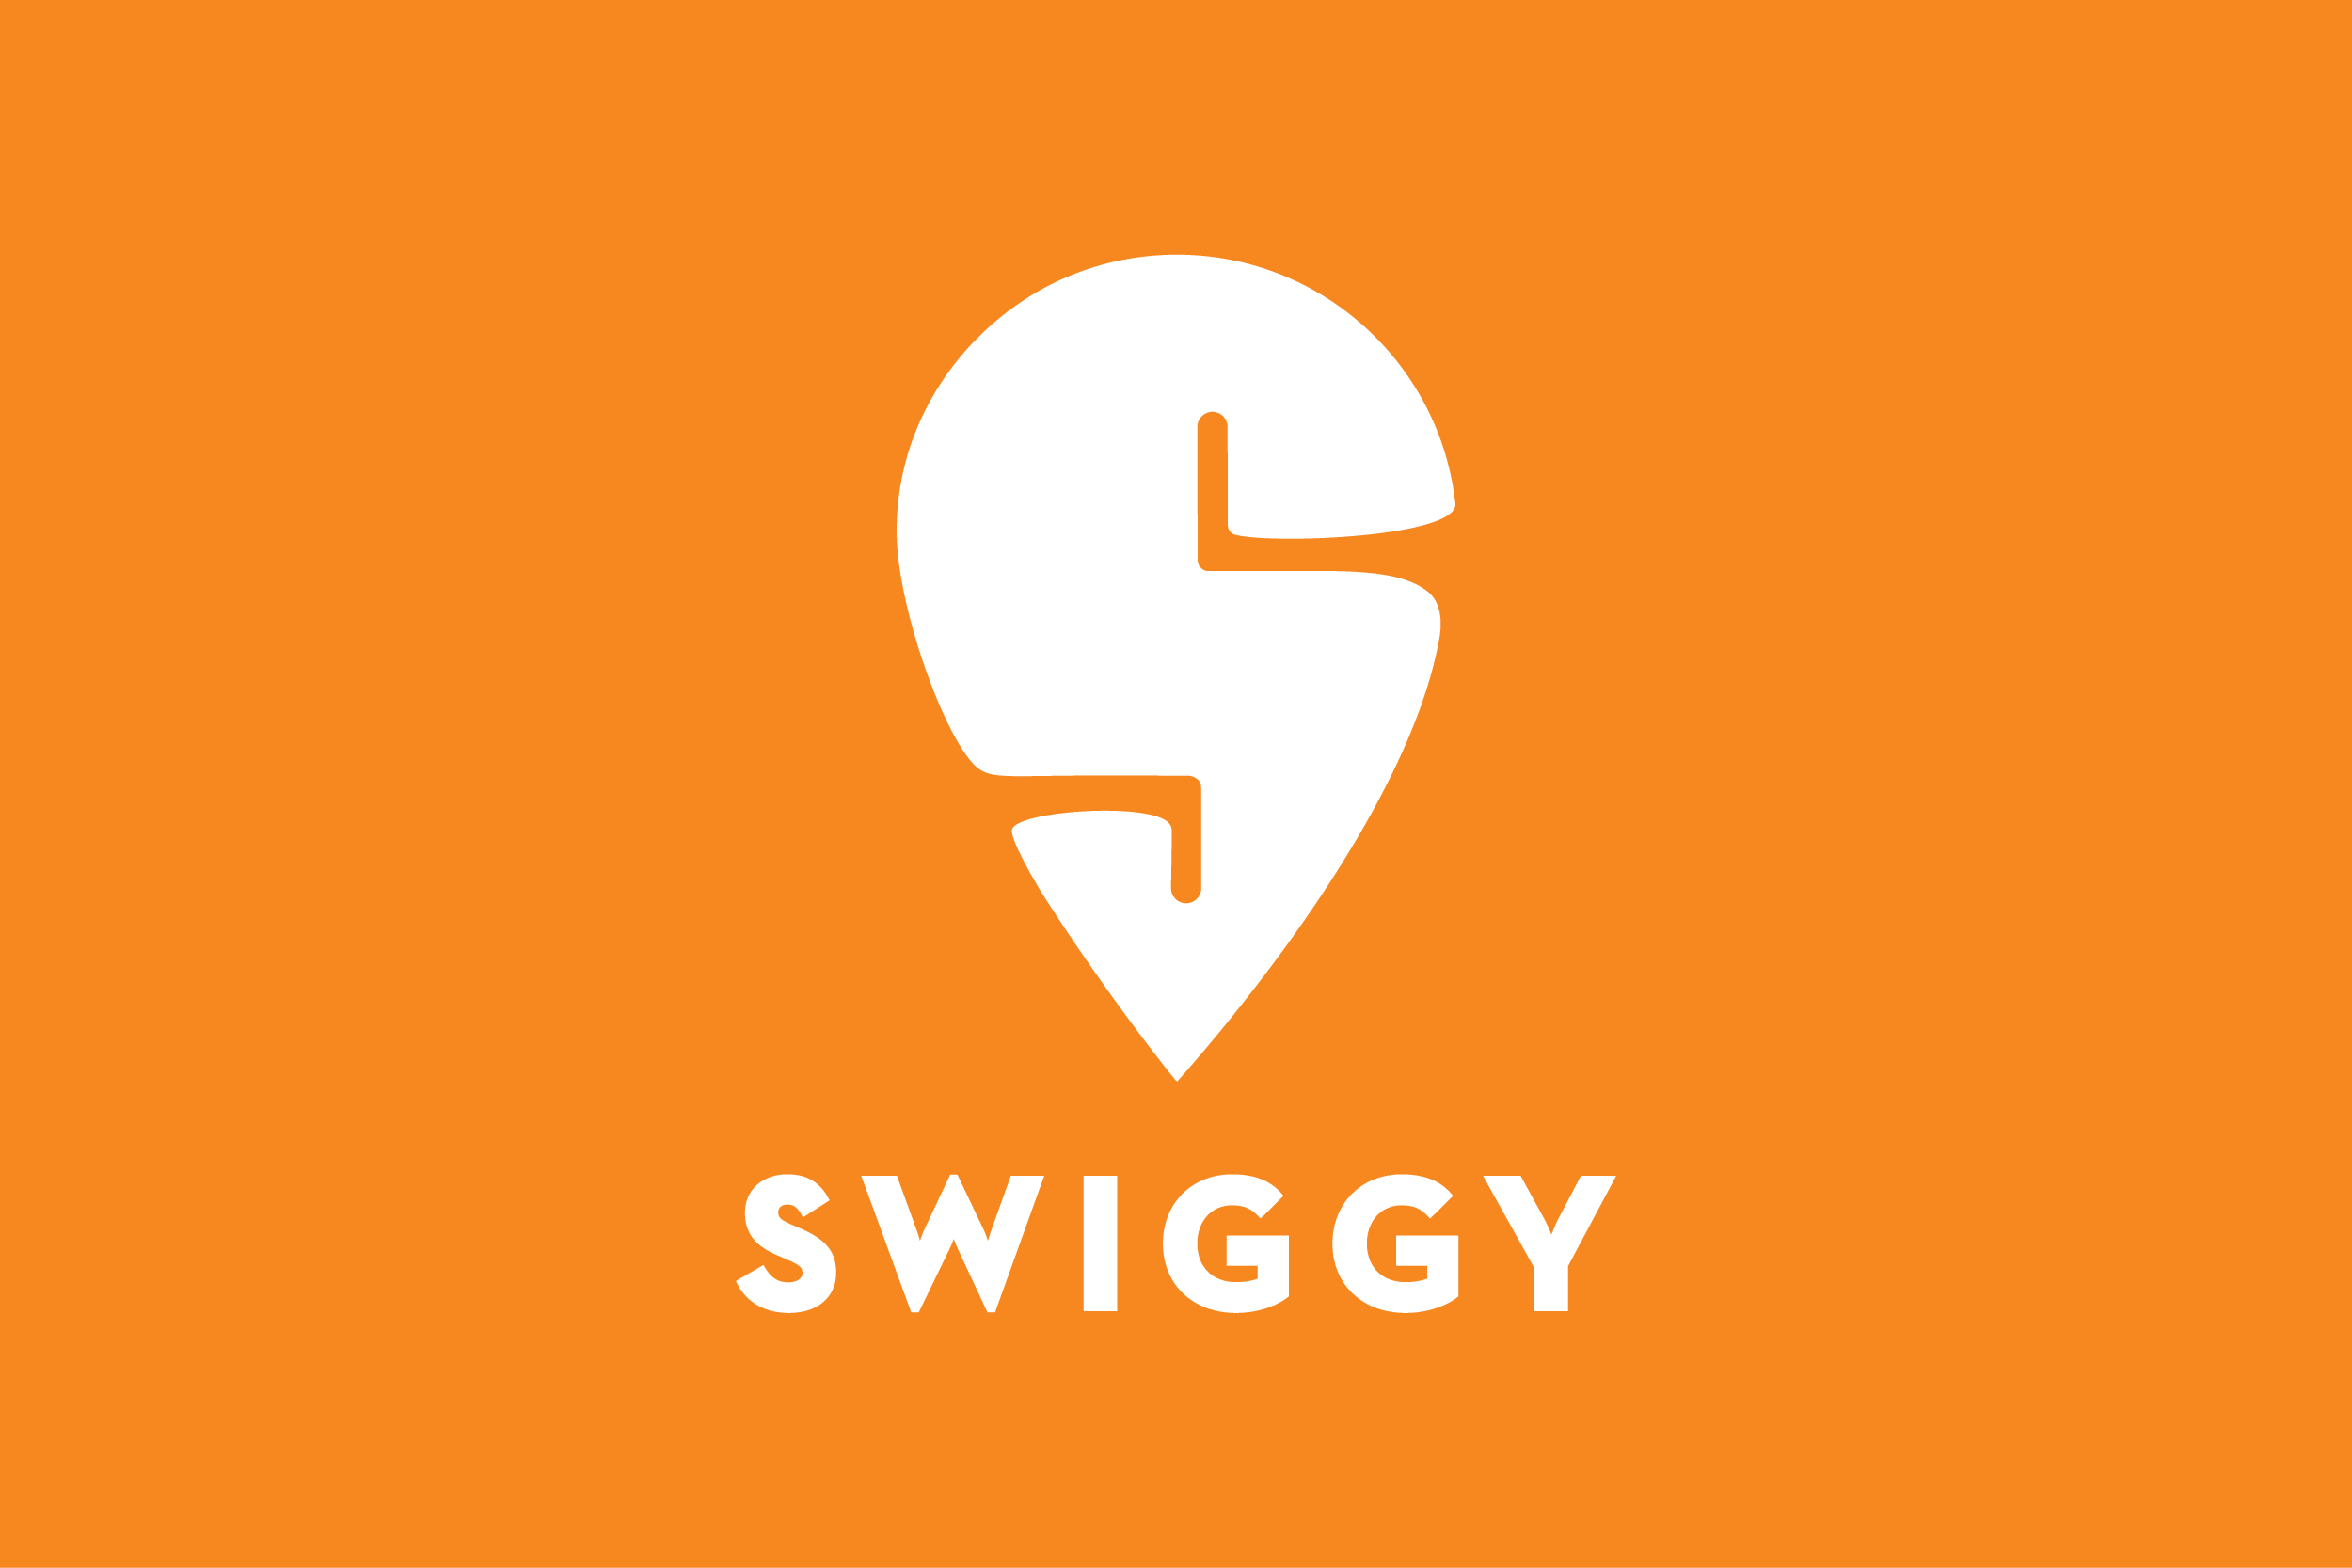 How Swiggy devoured competition in India - Digital Innovation and Transformation